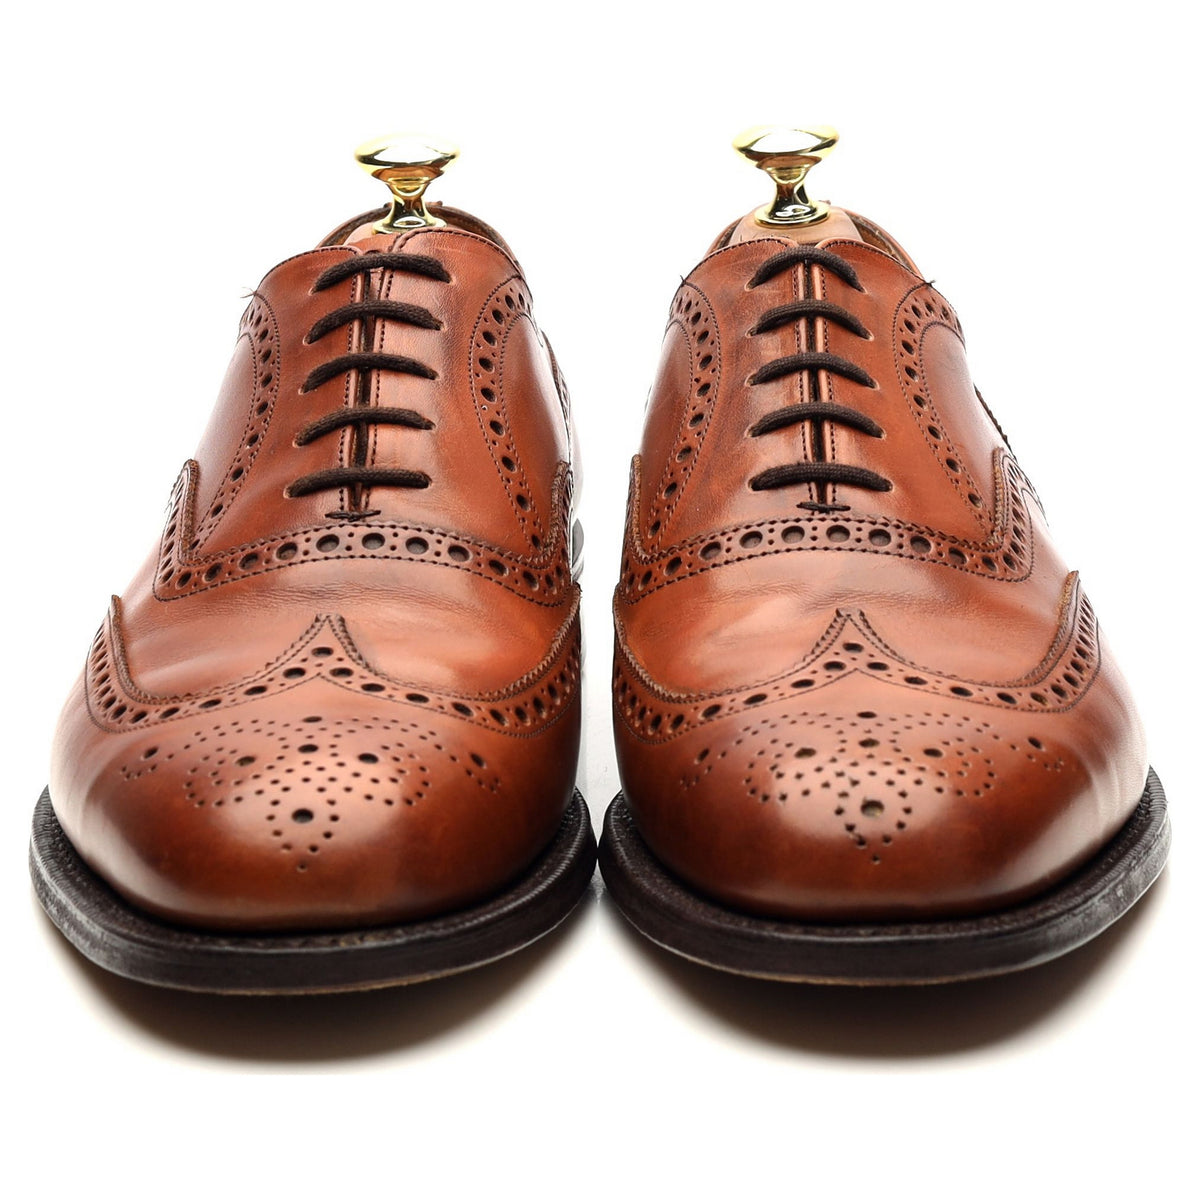 &#39;Chetwynd&#39; Tan Brown Leather Oxford Brogues UK 7.5 G